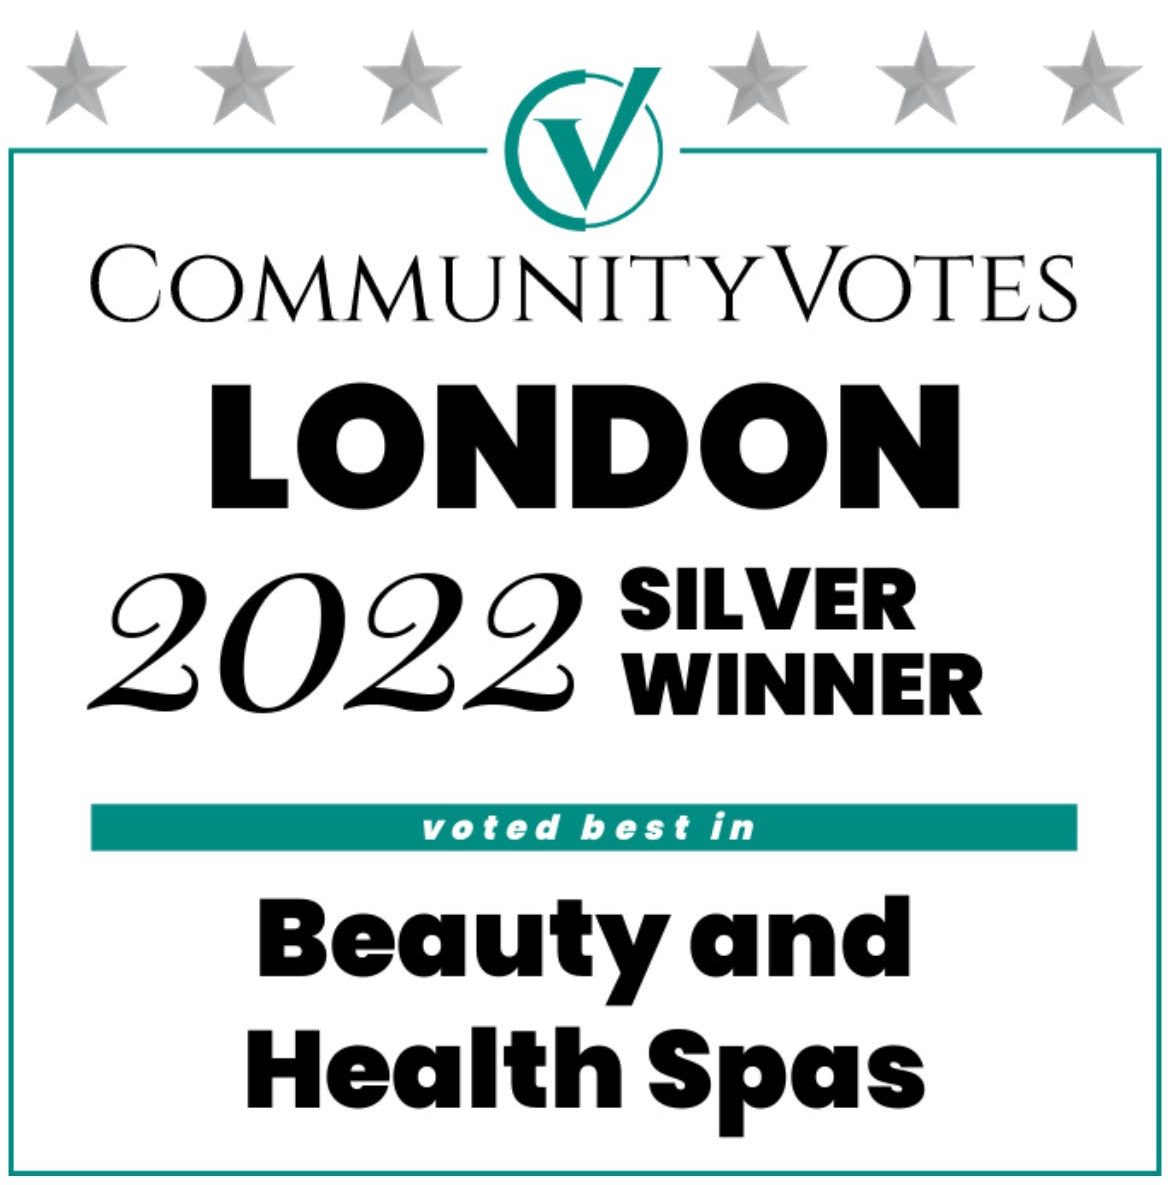 Beauty and Health Spas Silver Winner 2022, Community Votes